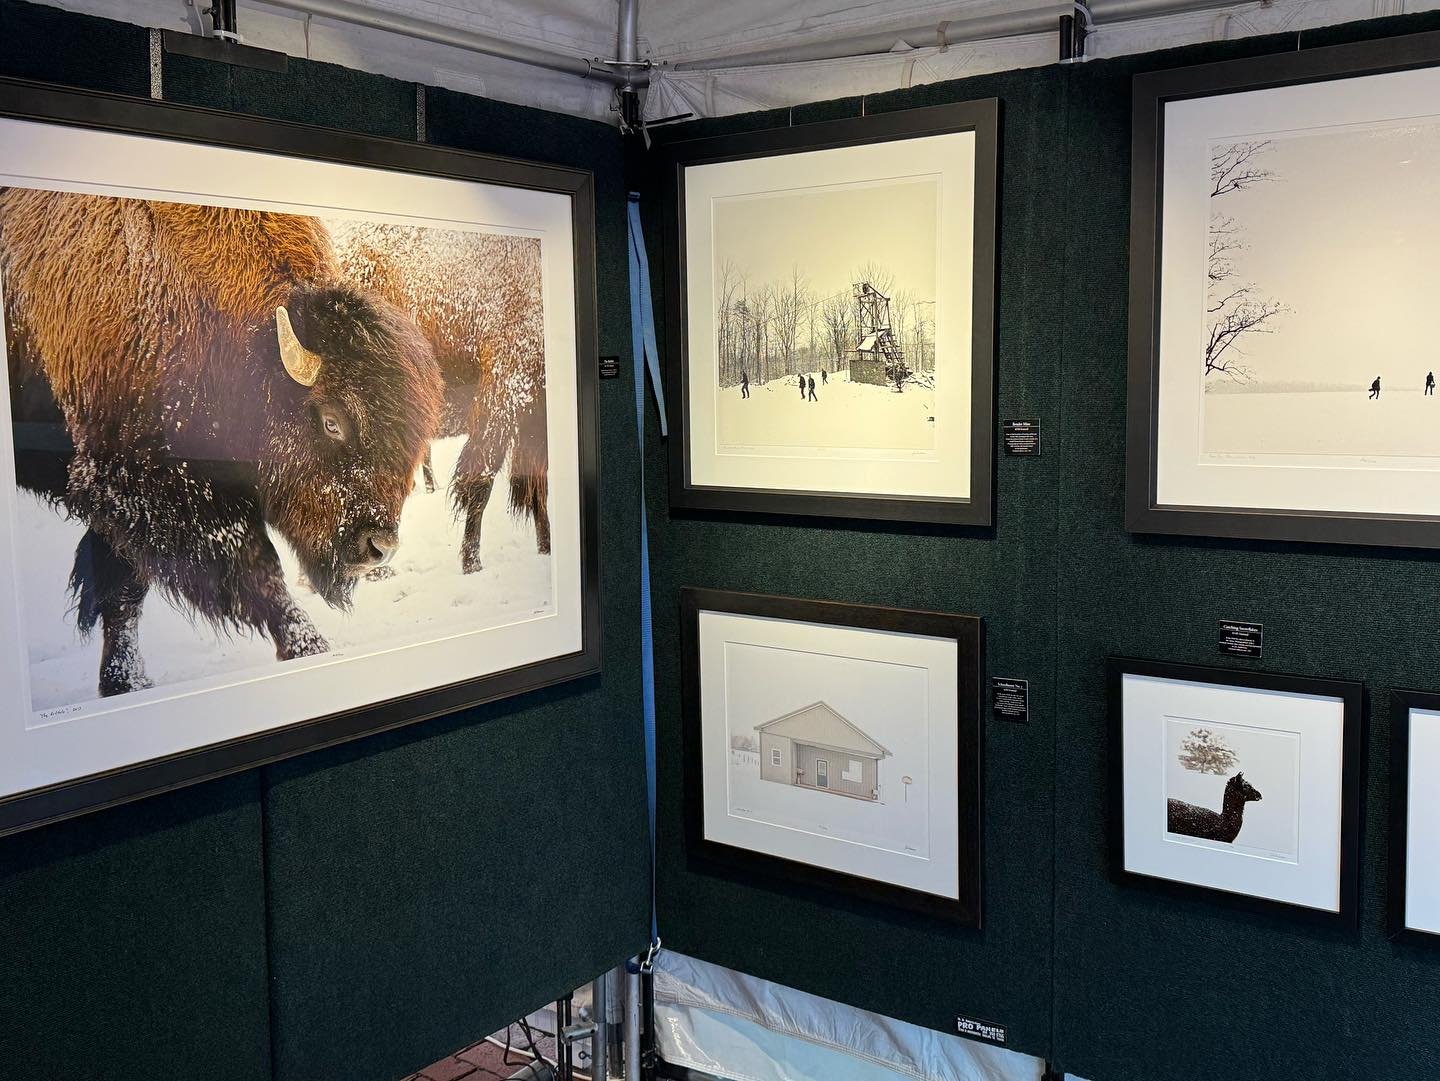 Last day of @mainstreetartsfest and weather is great after yesterday&rsquo;s rain. The large buffalo photograph just sold but come see what other photographs I have. I&rsquo;ll be here in booth 628/630 until 6 #mainstfortworthartsfestival #fineartpho